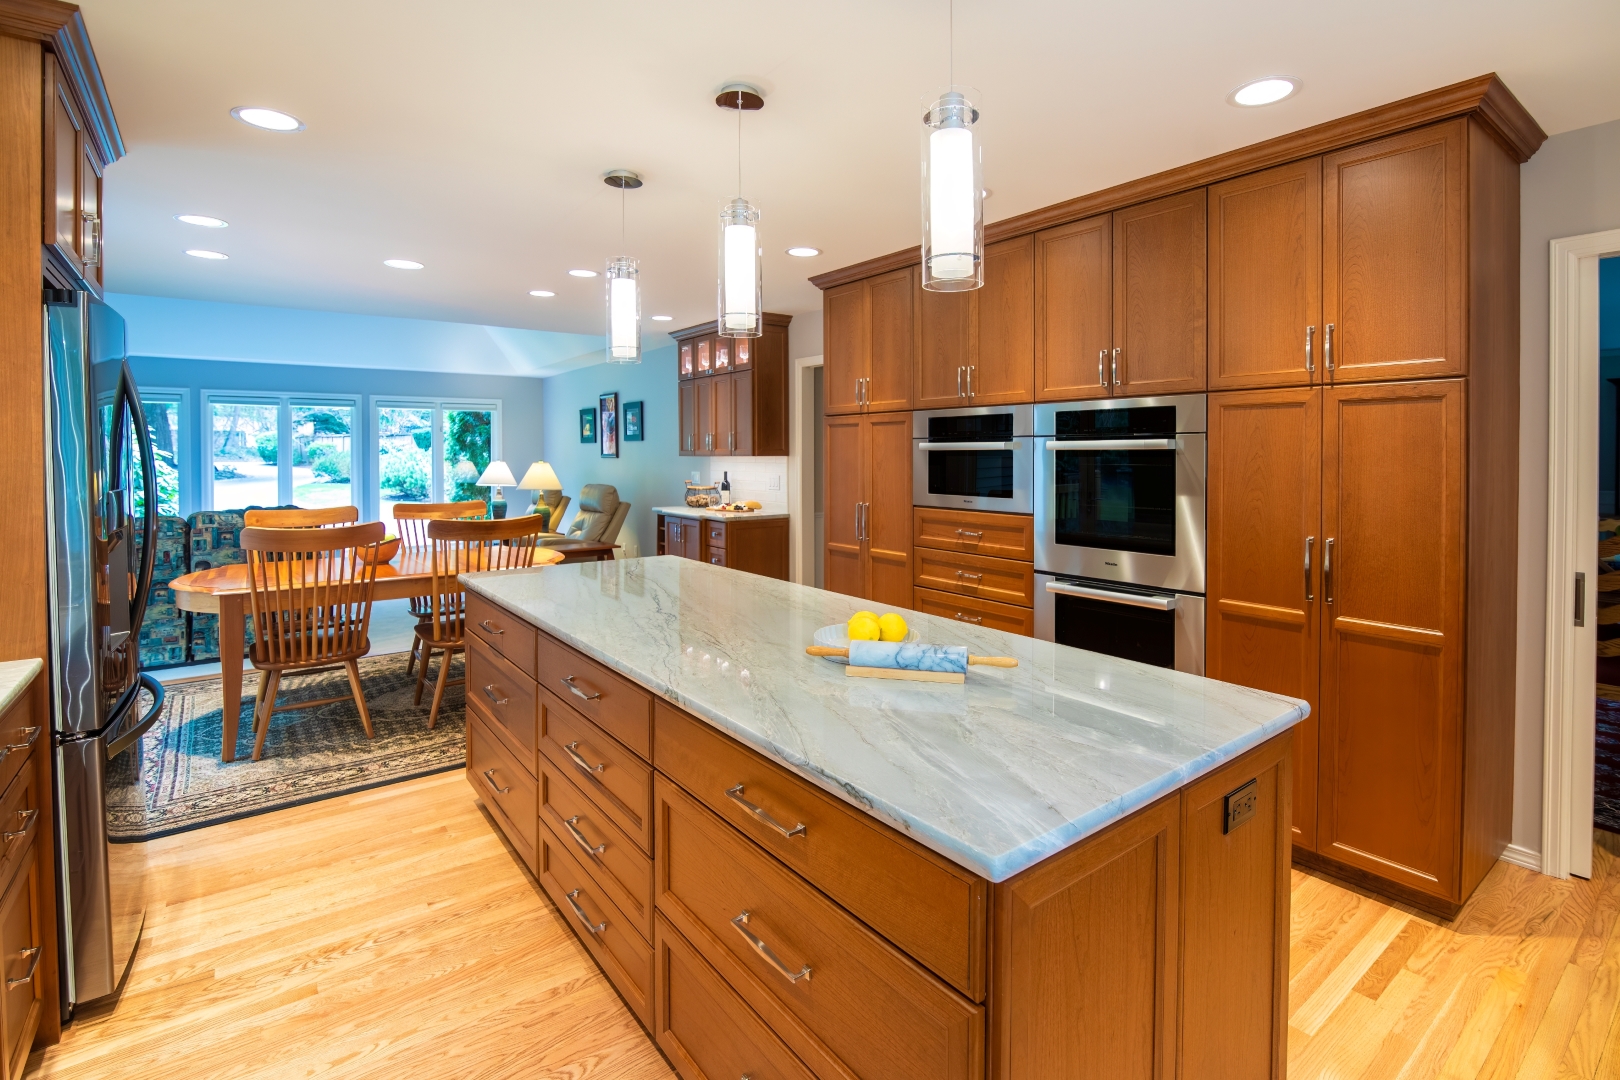 2023 Remodeling Excellence Winner, Residential Remodel Excellence—Aging in Place, More Than $100,000